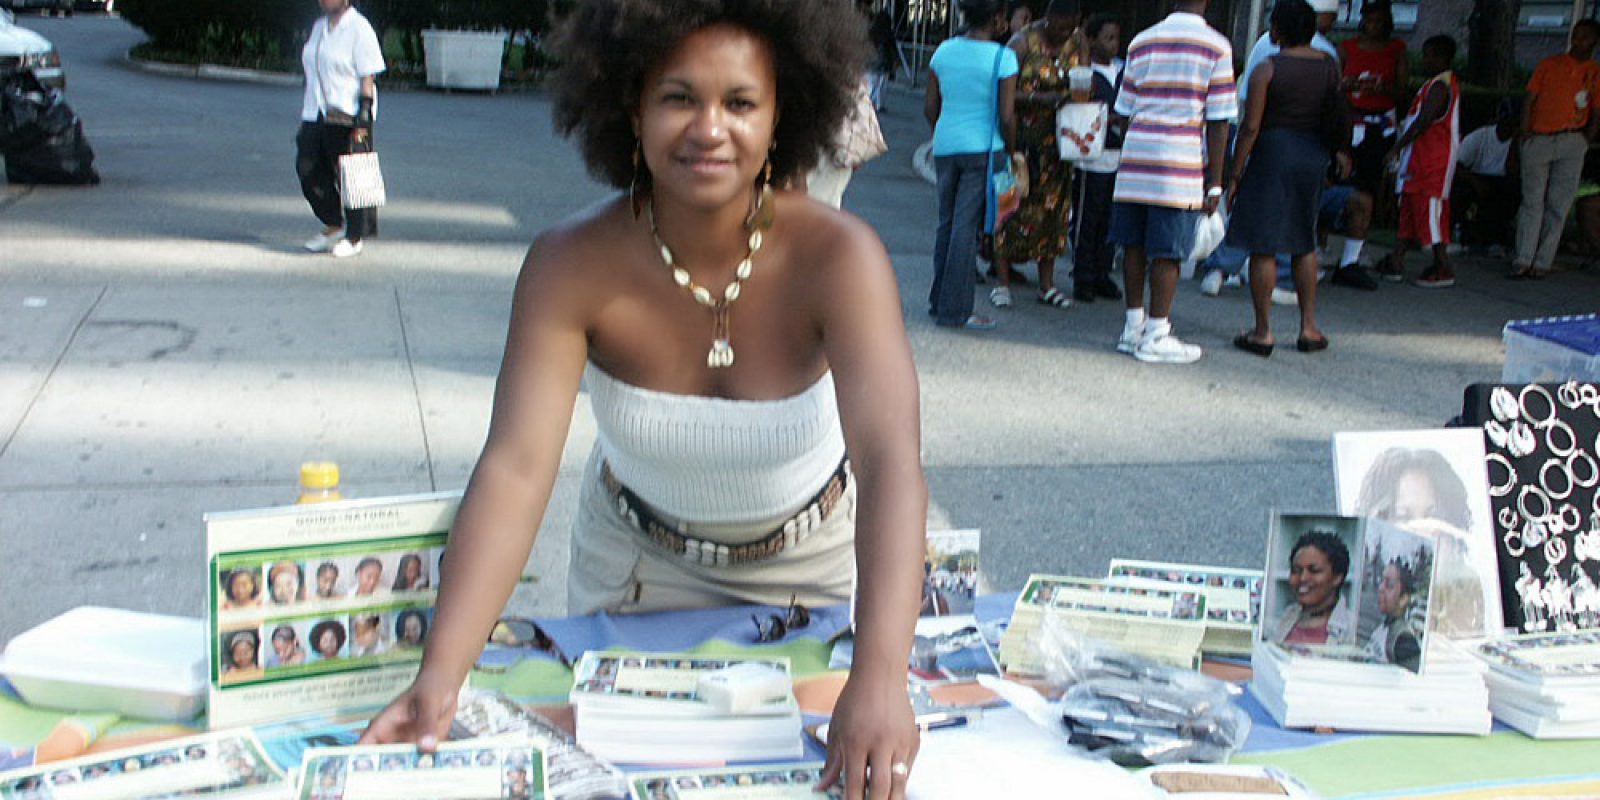 Mireille Liong, author of Going Natural at the Harlem Book Fair